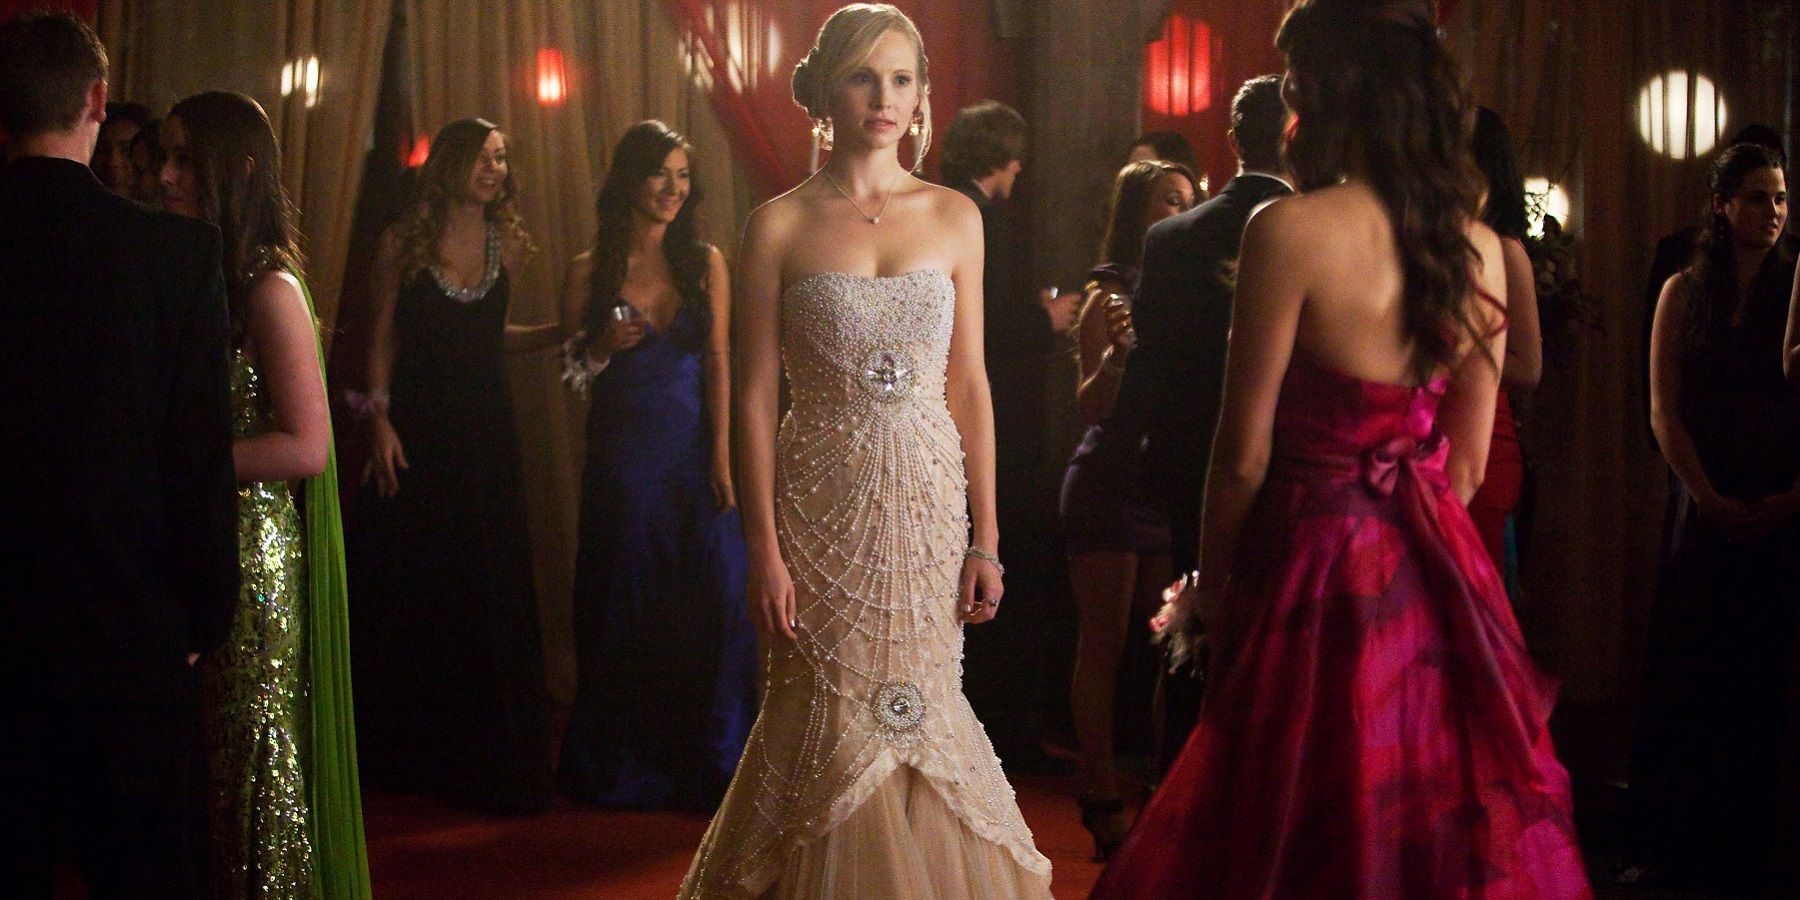 Caroline and Elena at the prom in The Vampire Diaries